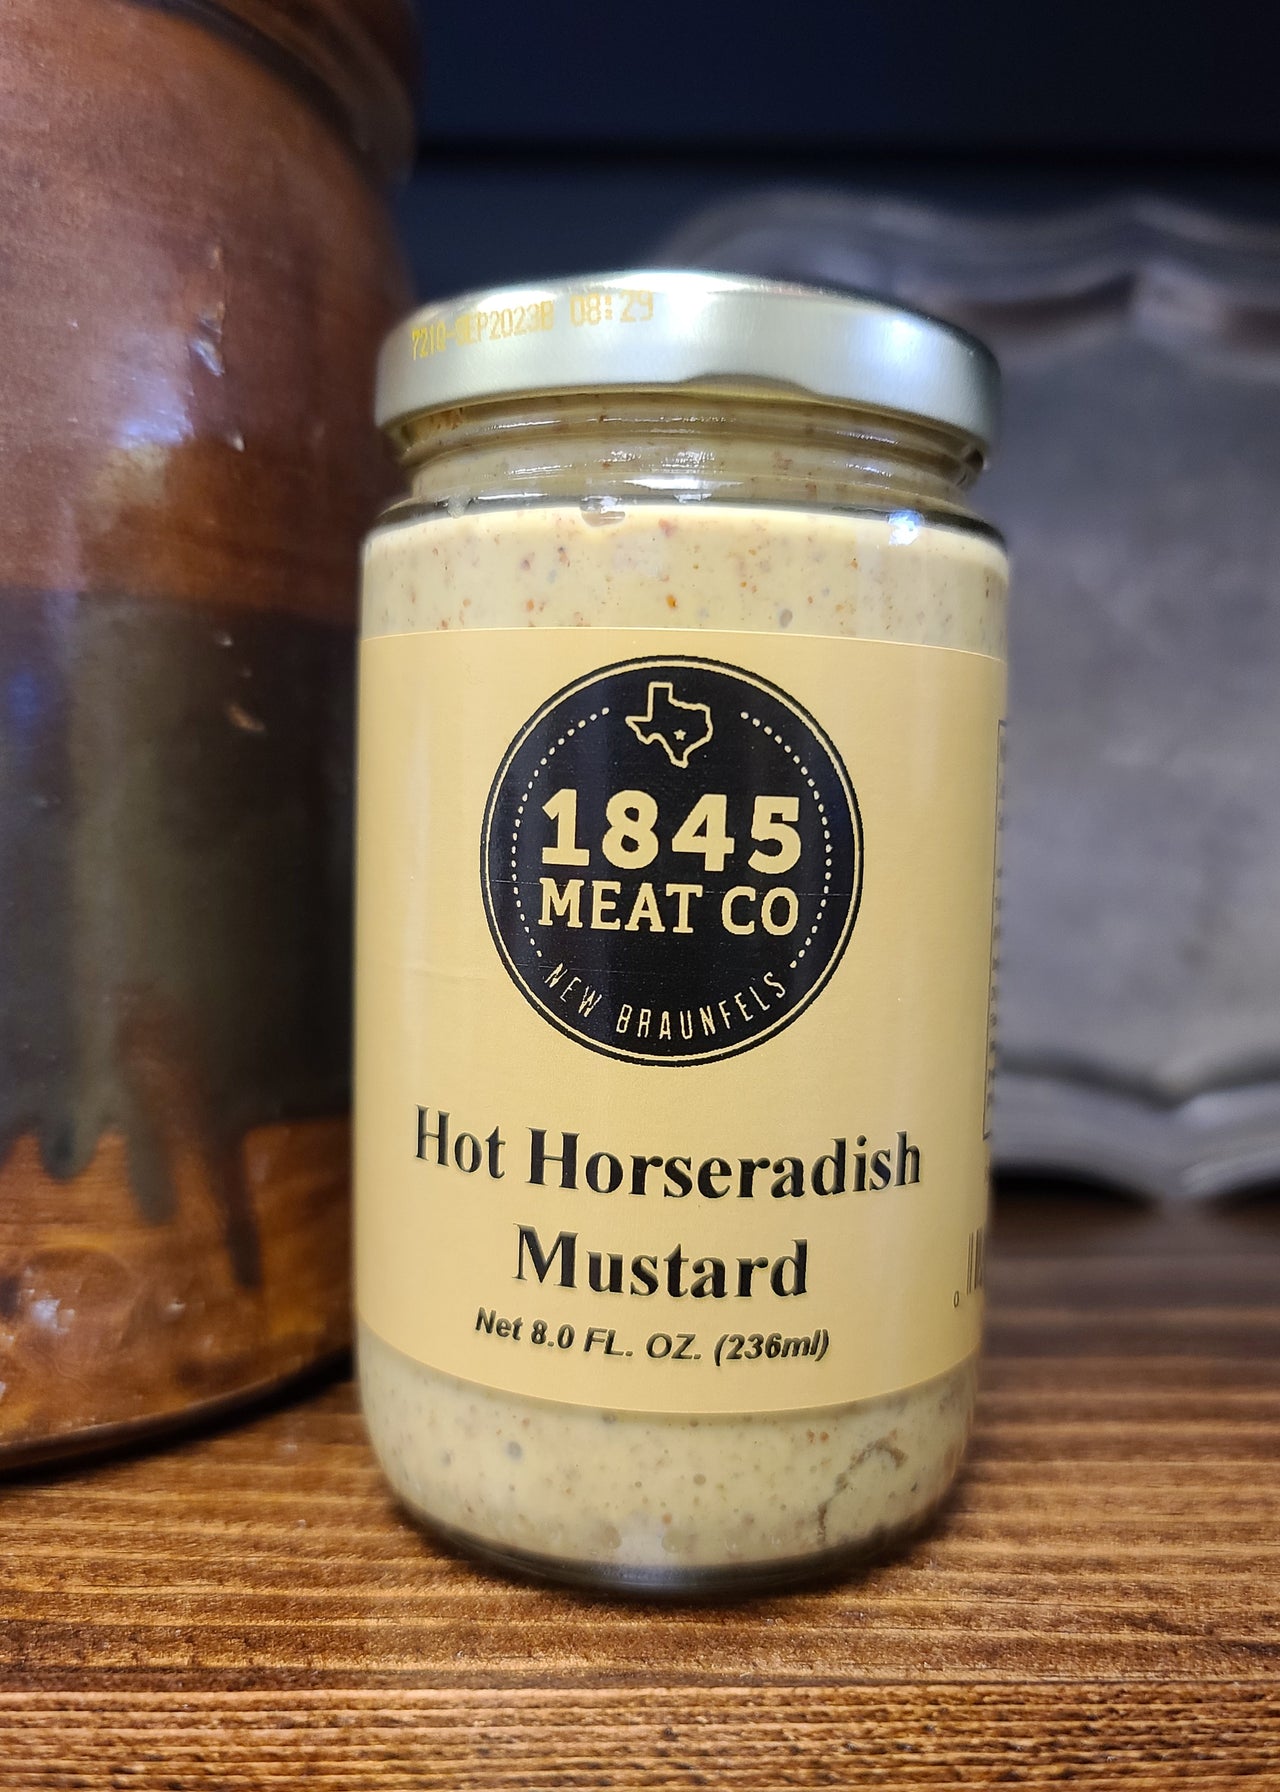 ﻿This mustard has just the right amount of horseradish to give this mustard that added bit of kick.